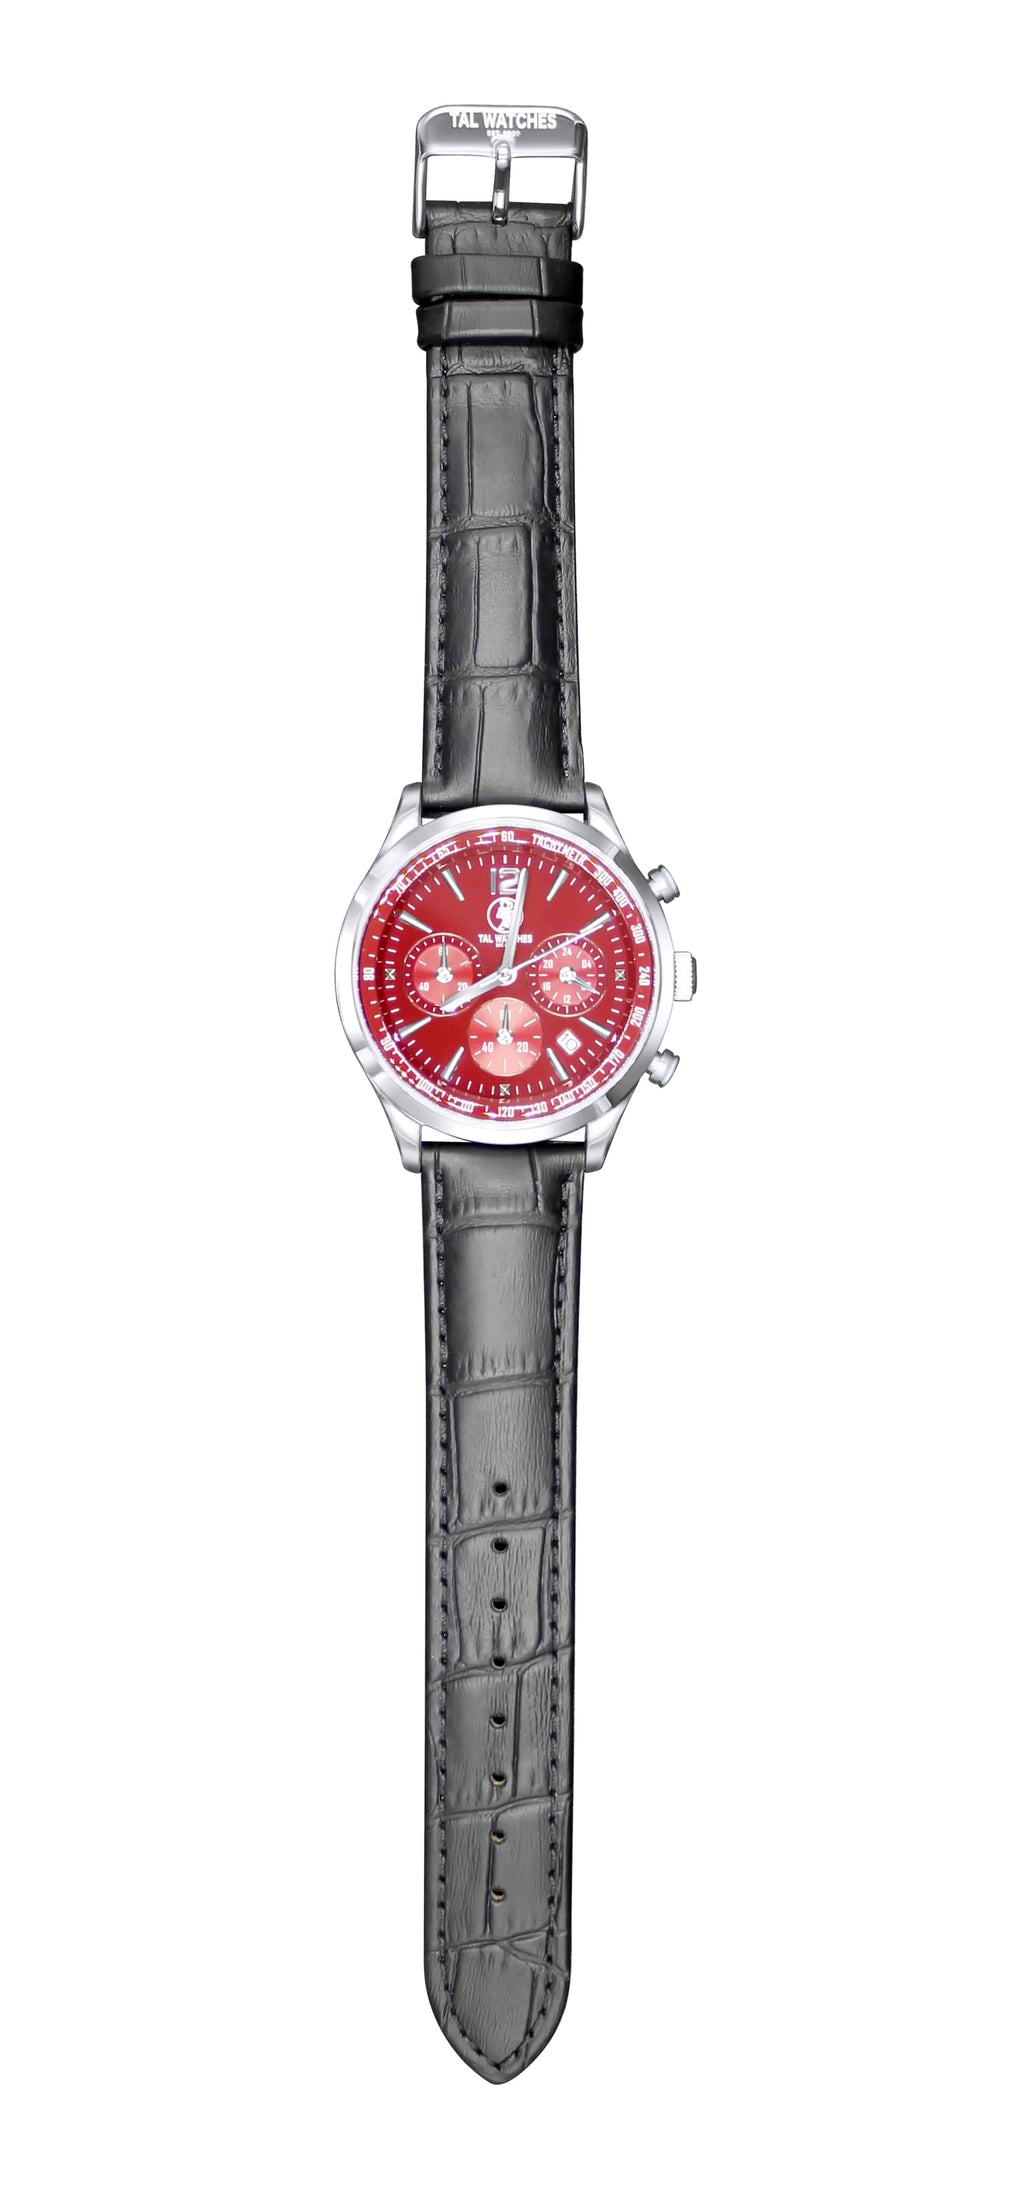 Chronograph Sapphire Bassy in Red - TAL WATCHES